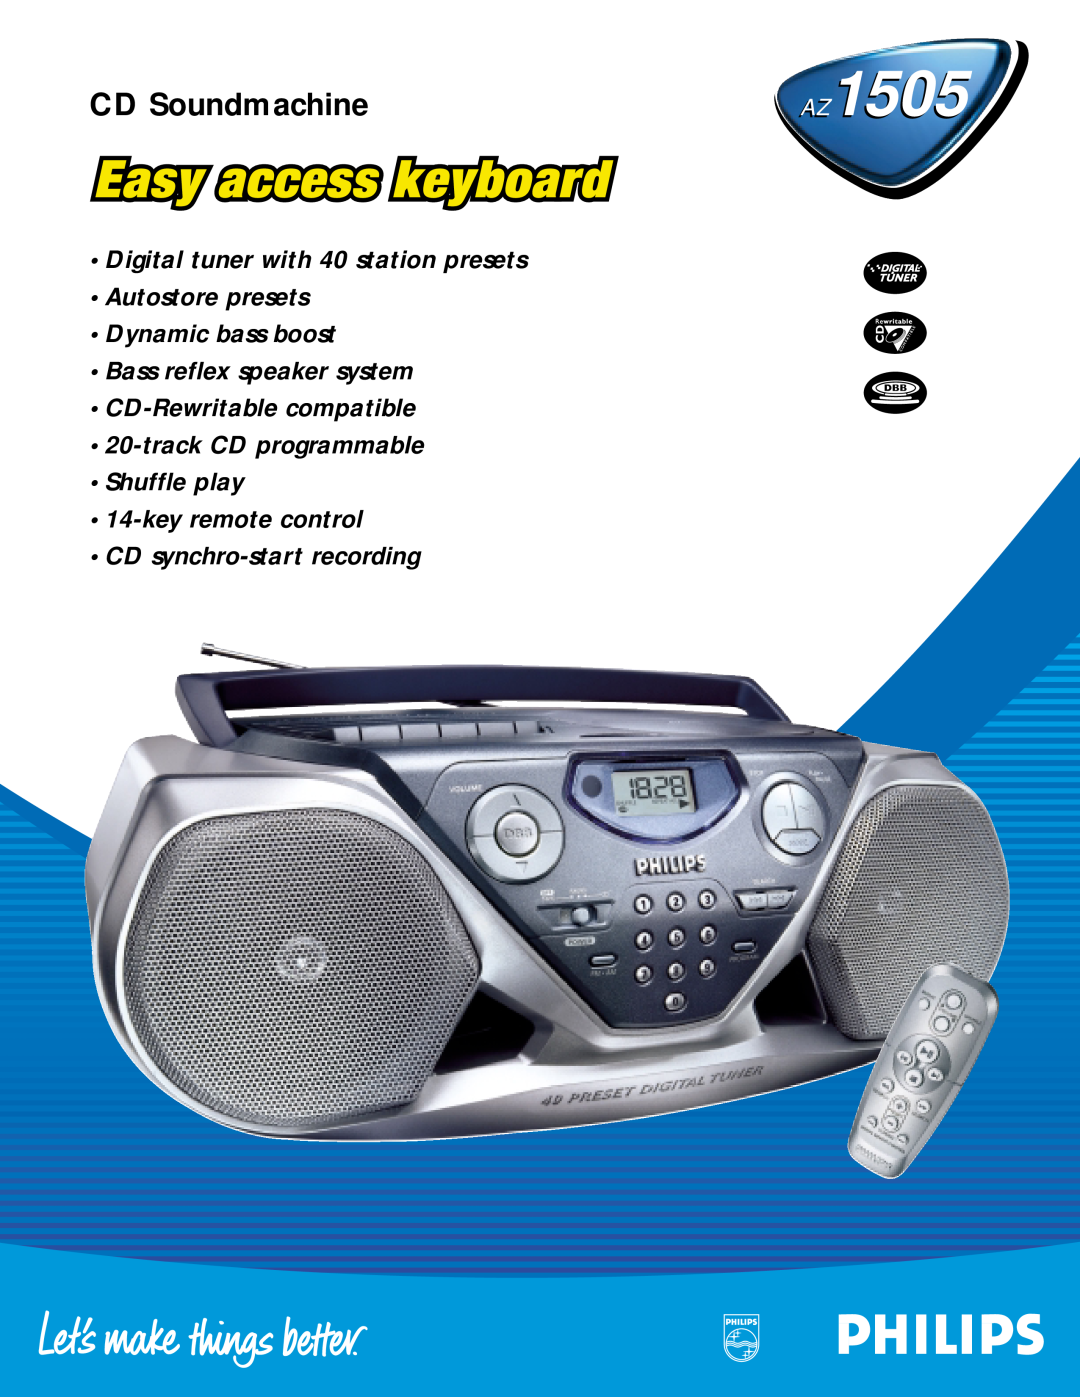 Philips AZ1505 manual CD Soundmachine, Digital tuner with 40 station presets, Autostore presets Dynamic bass boost 